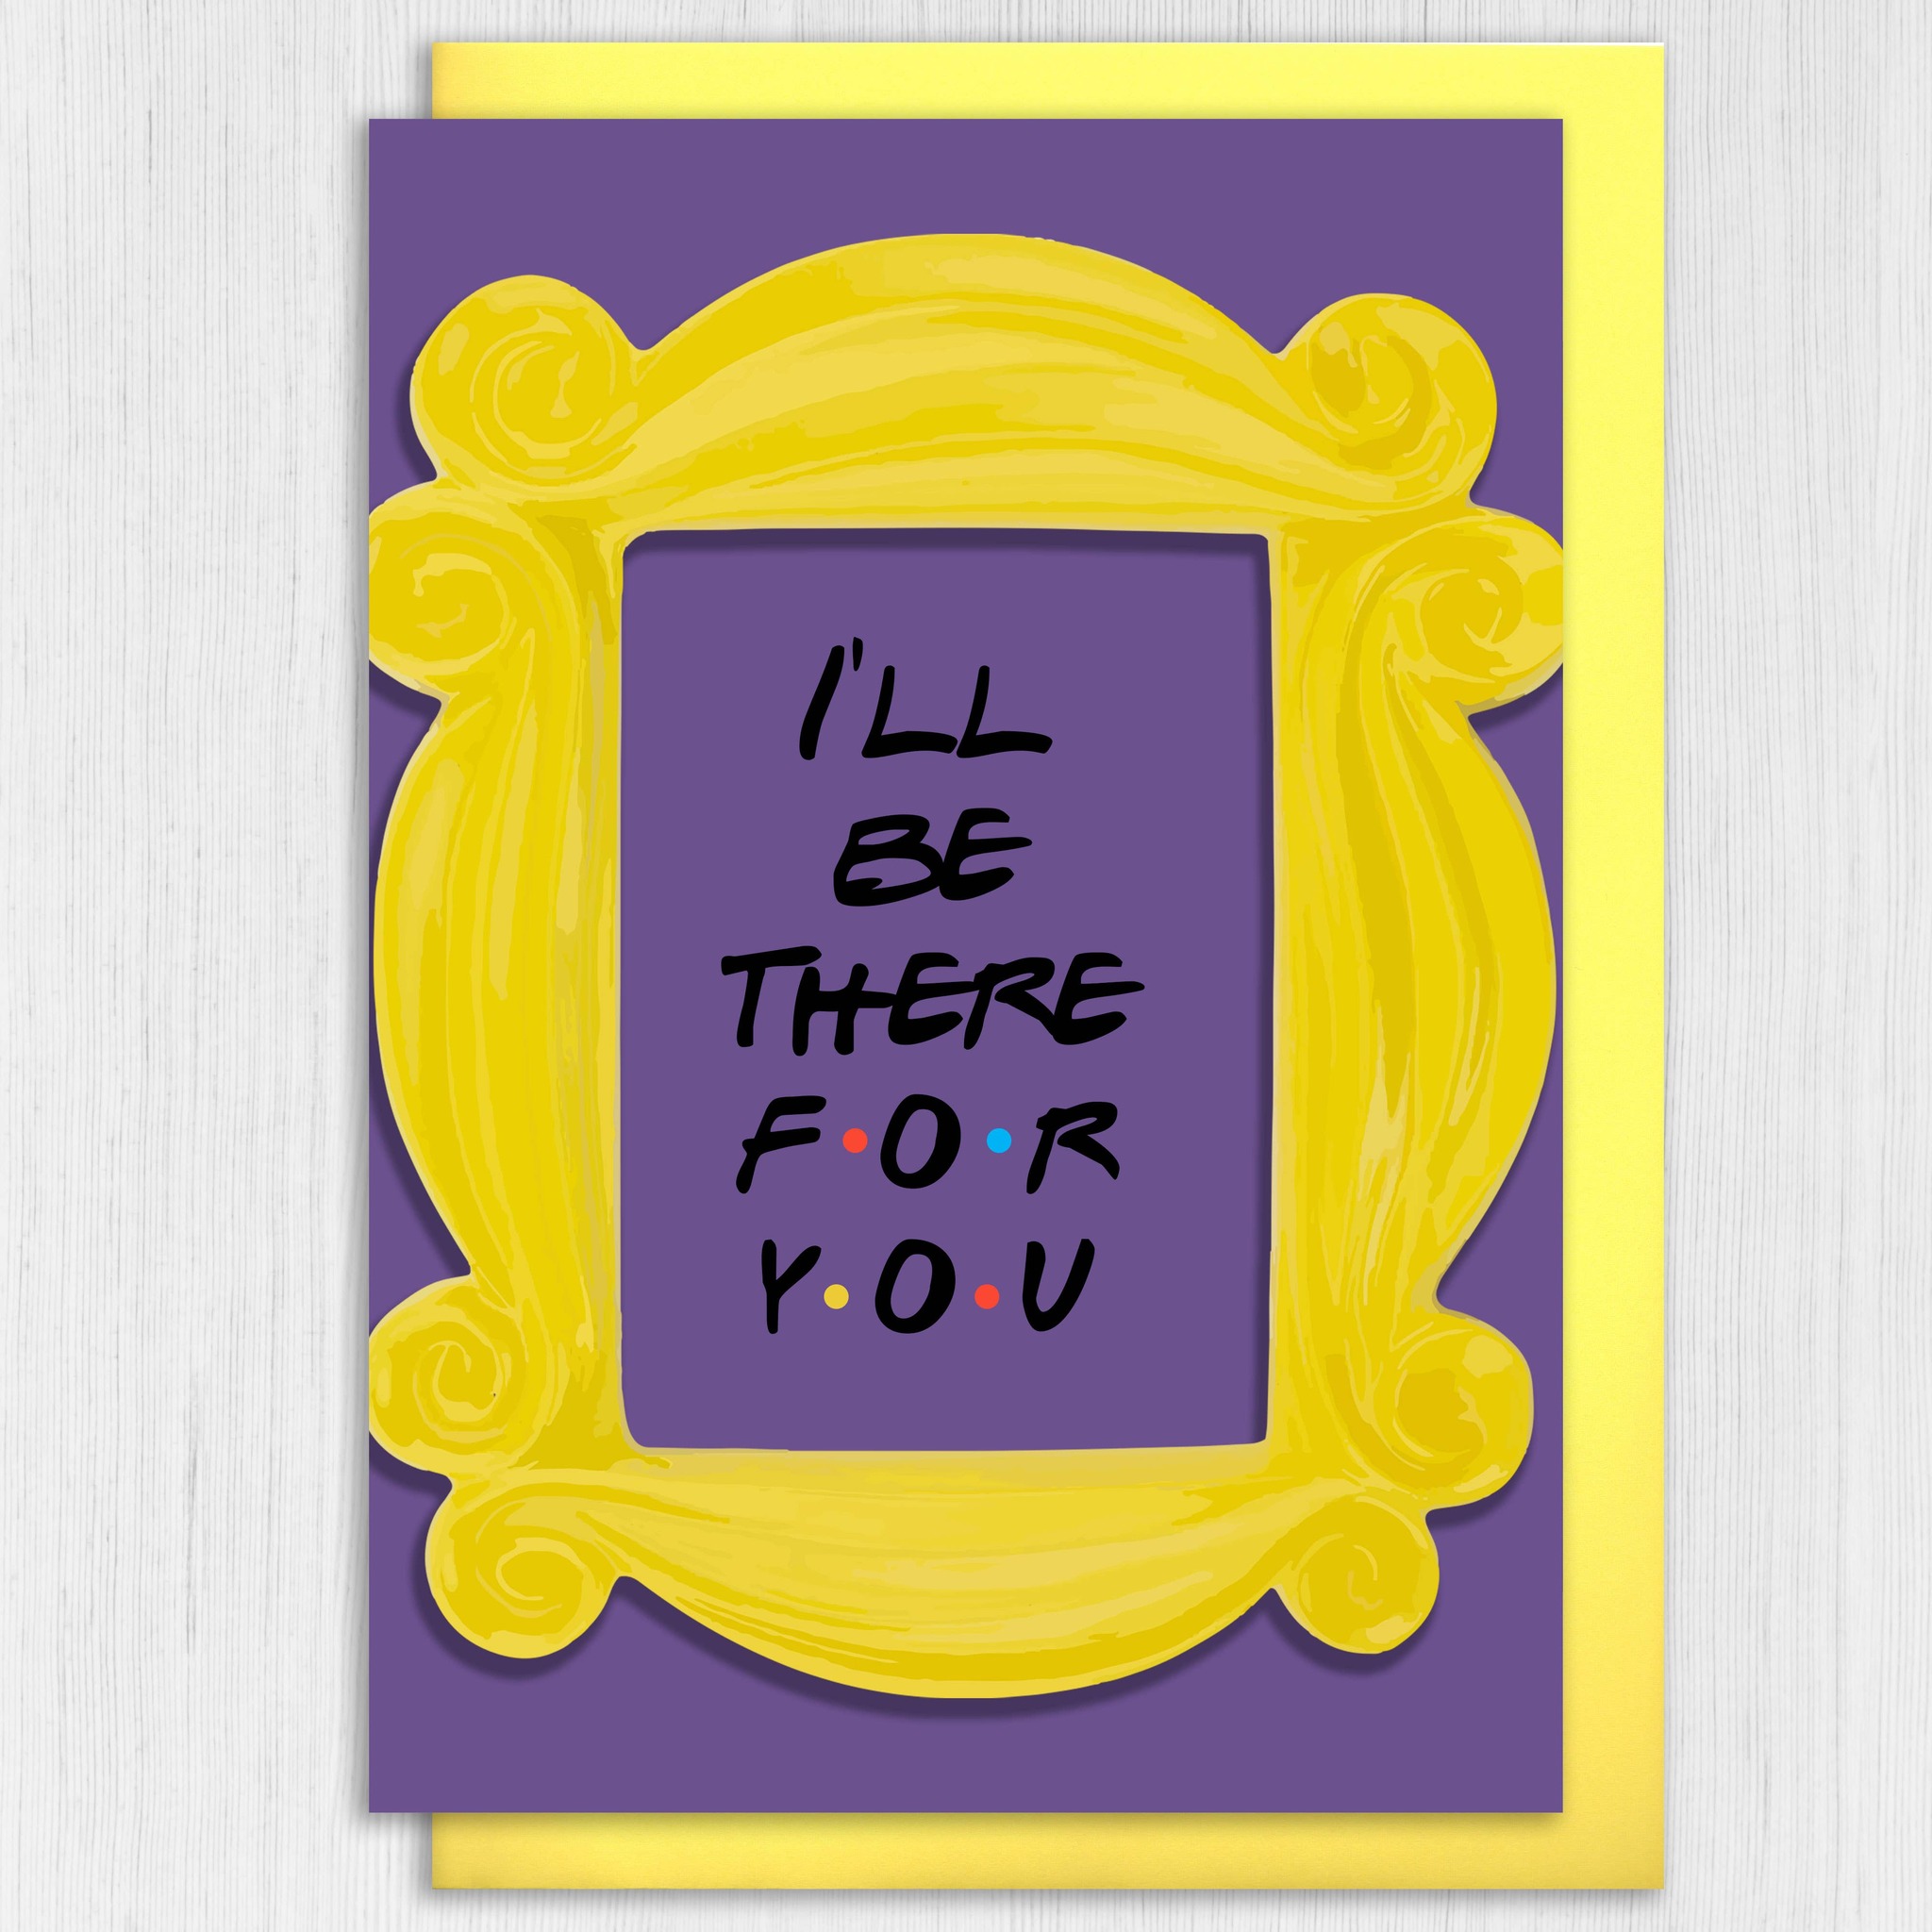 Prints with Personality - Friends:  "I'll be there for you" Card